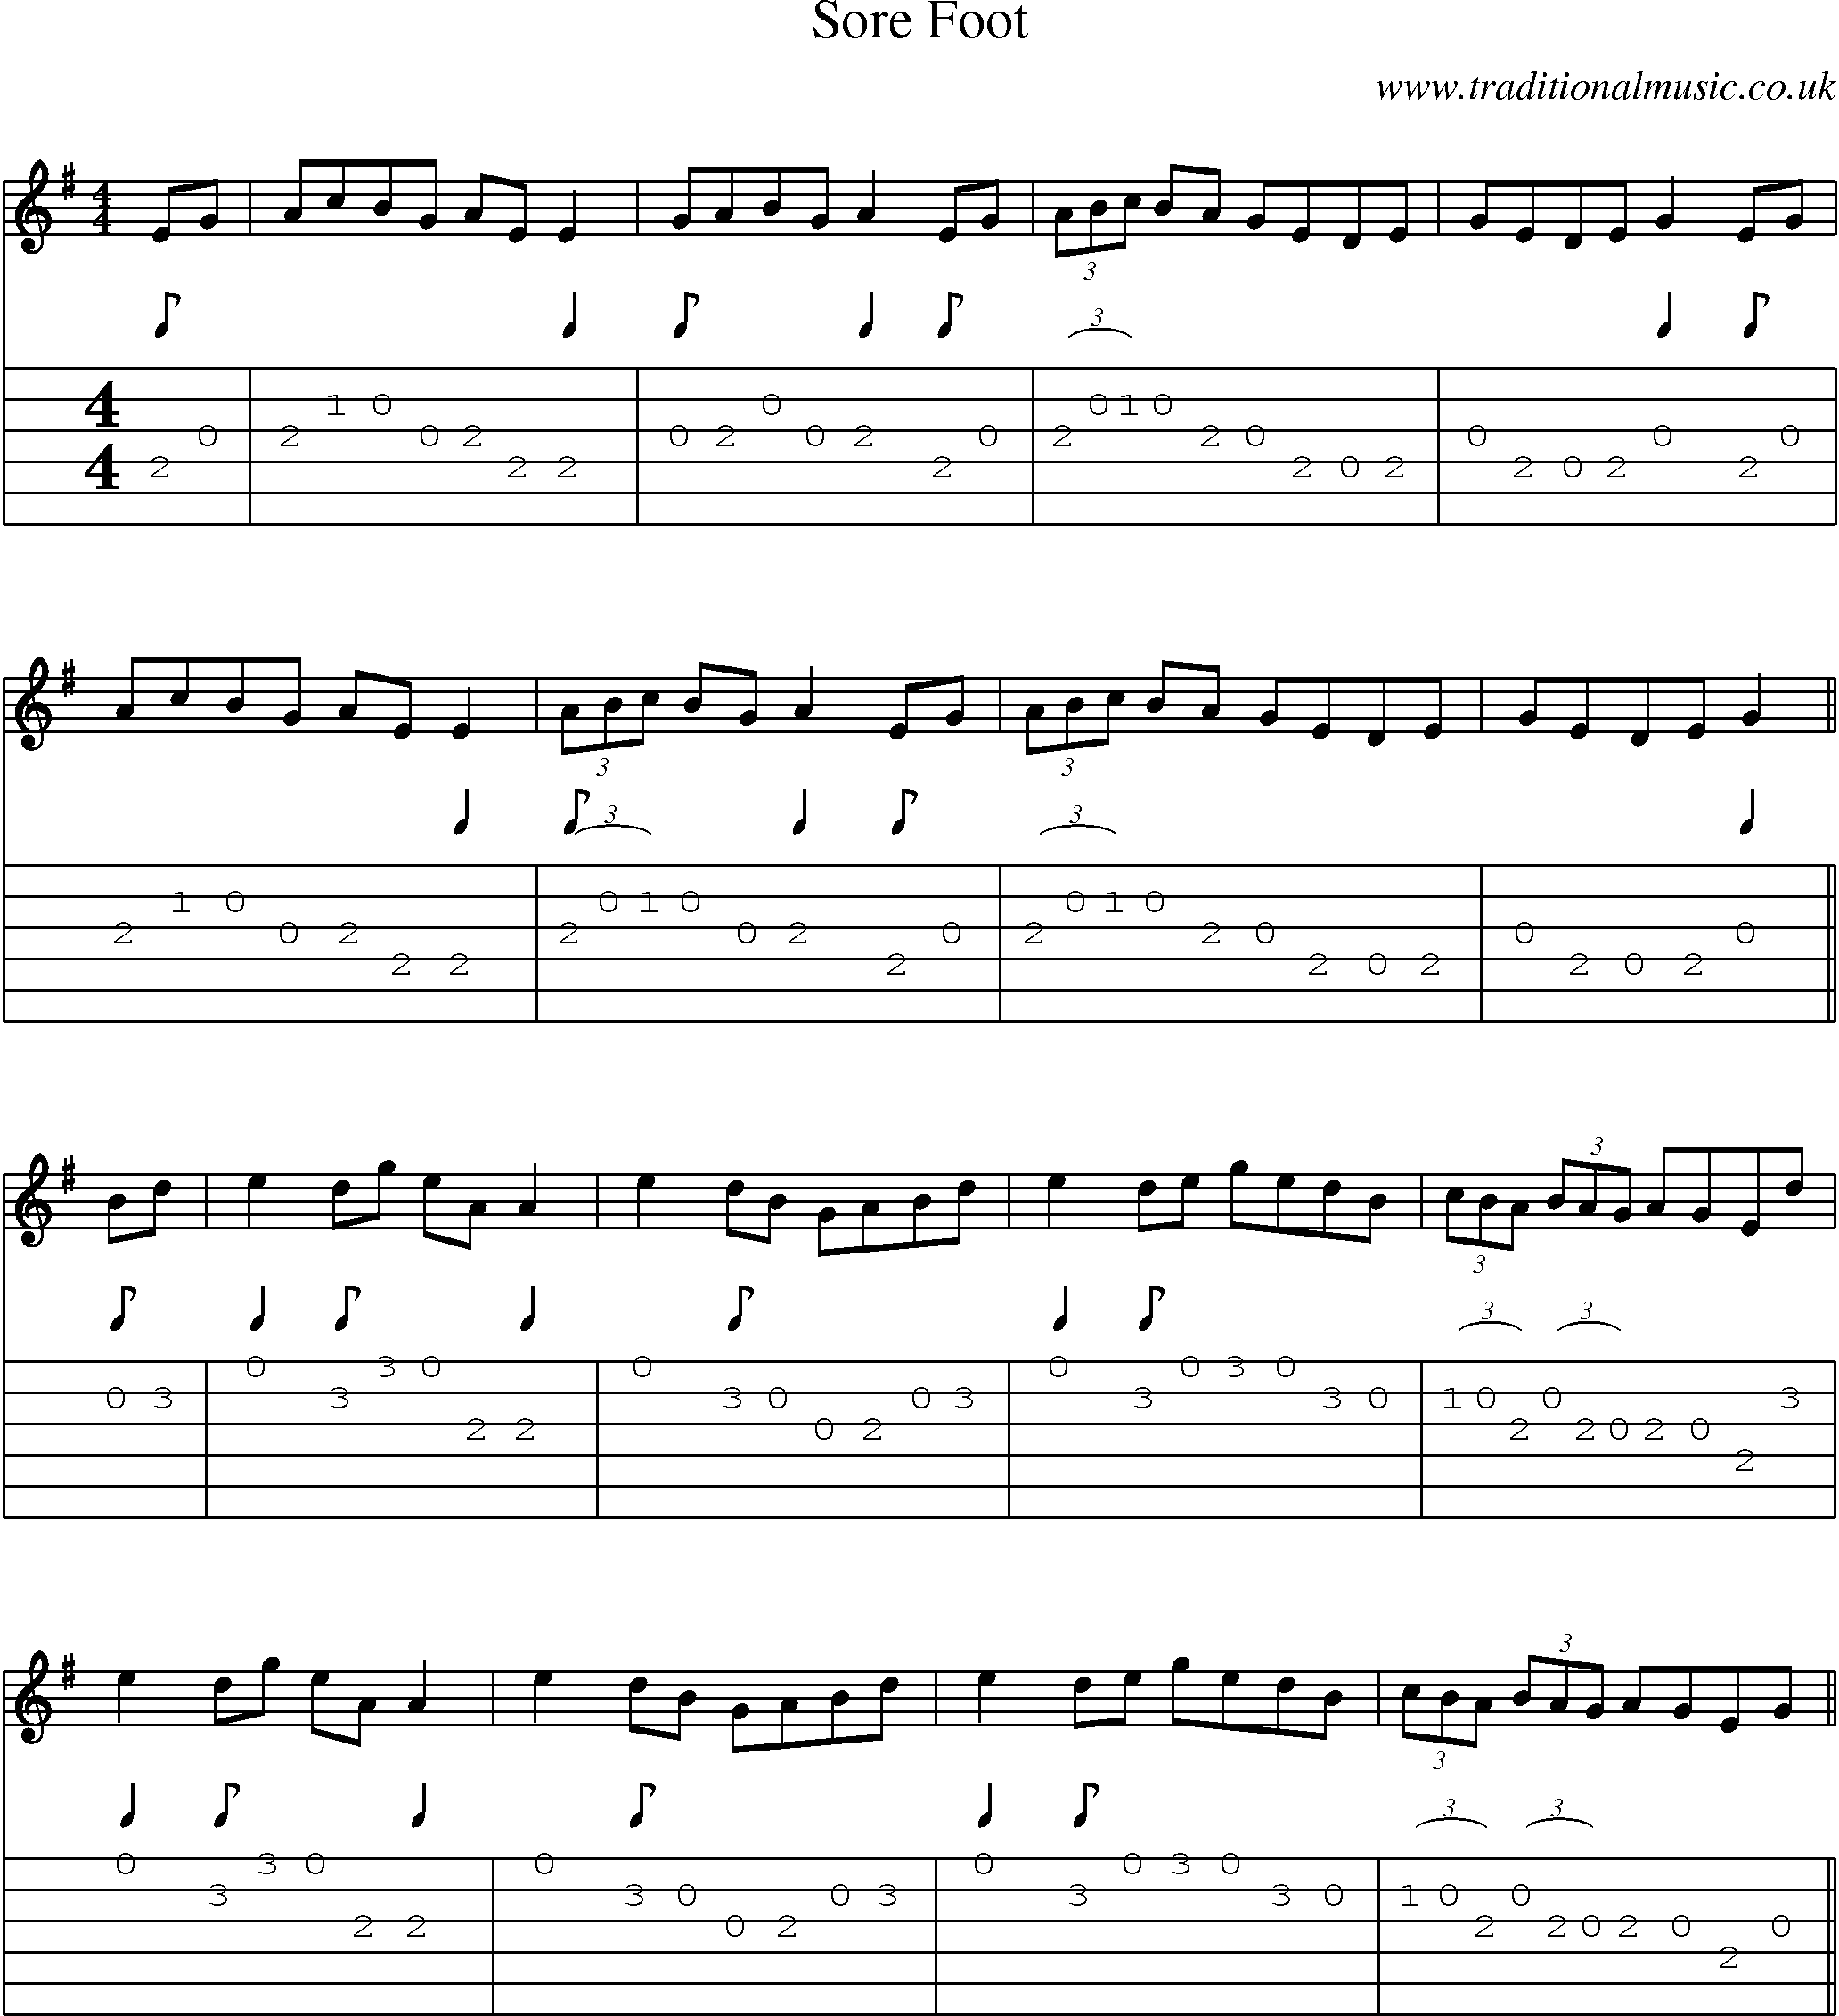 Music Score and Guitar Tabs for Sore Foot